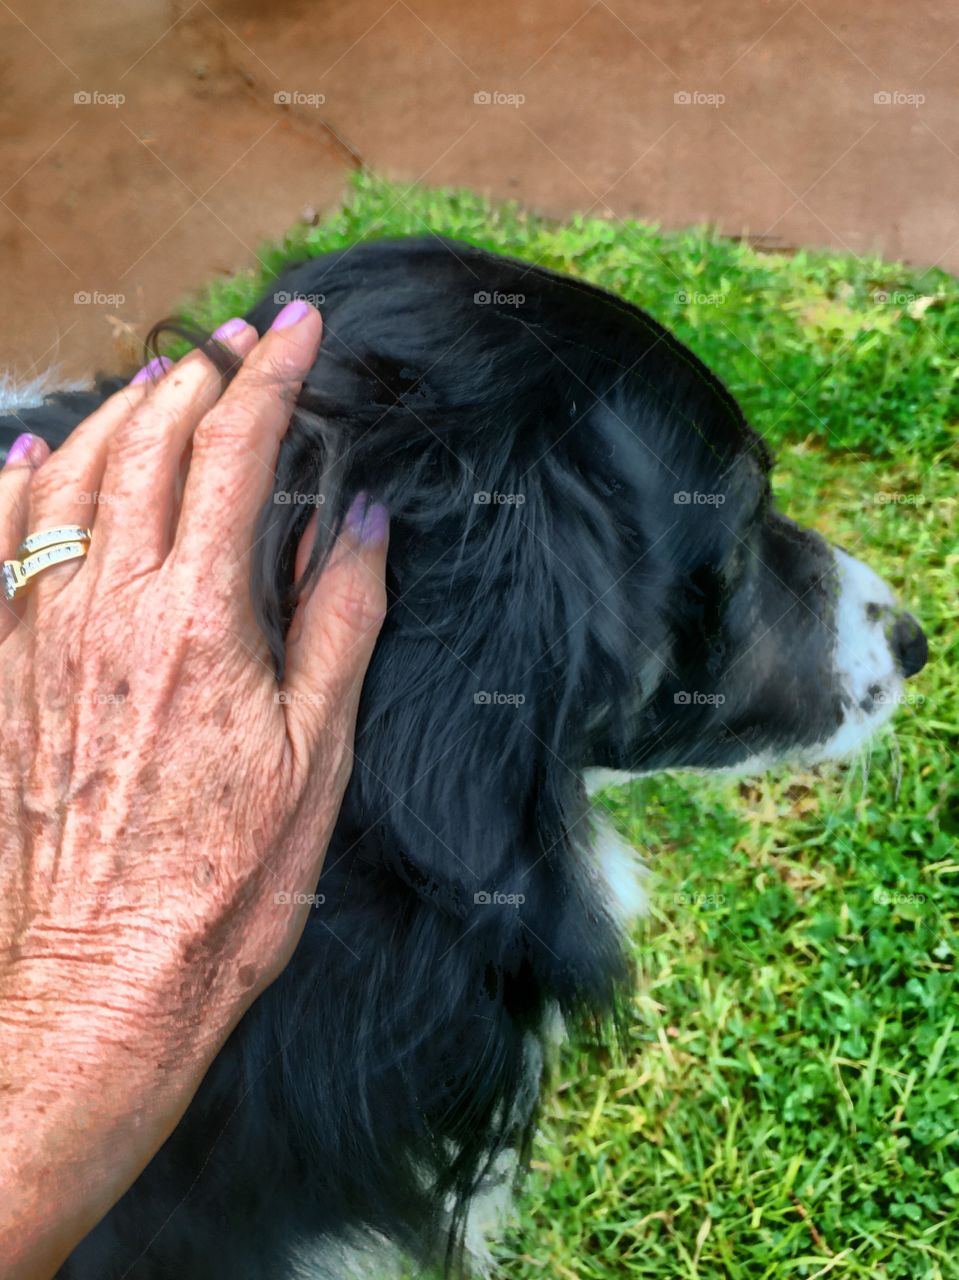 Liver spots and wrinkled woman's hands petting border collie sheepdog. 